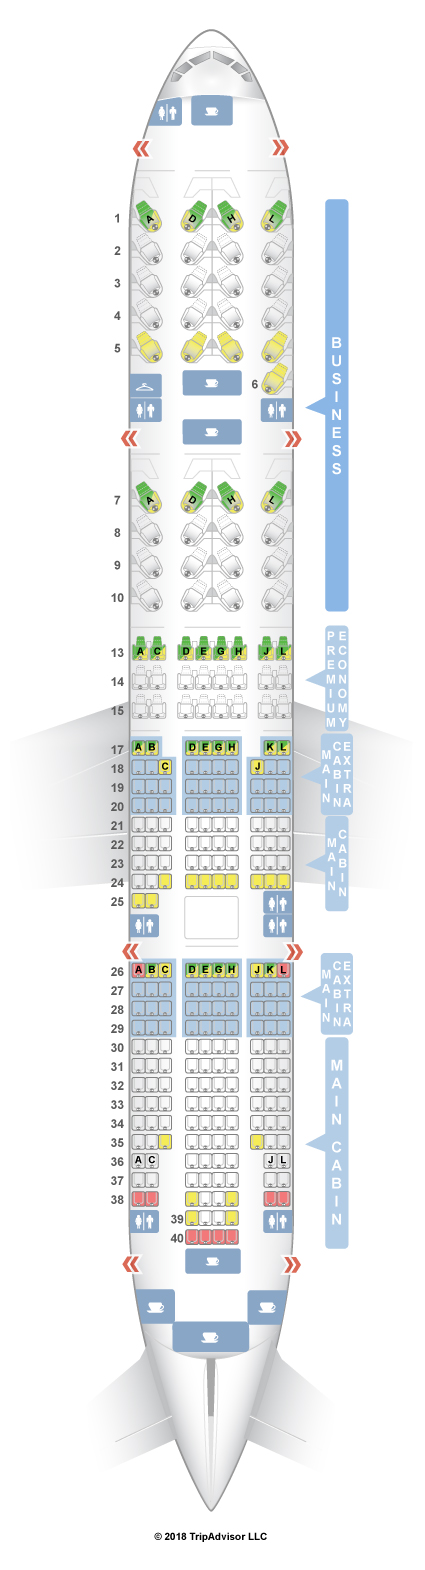 31 American Airlines 777 Seating Map Maps Database Source